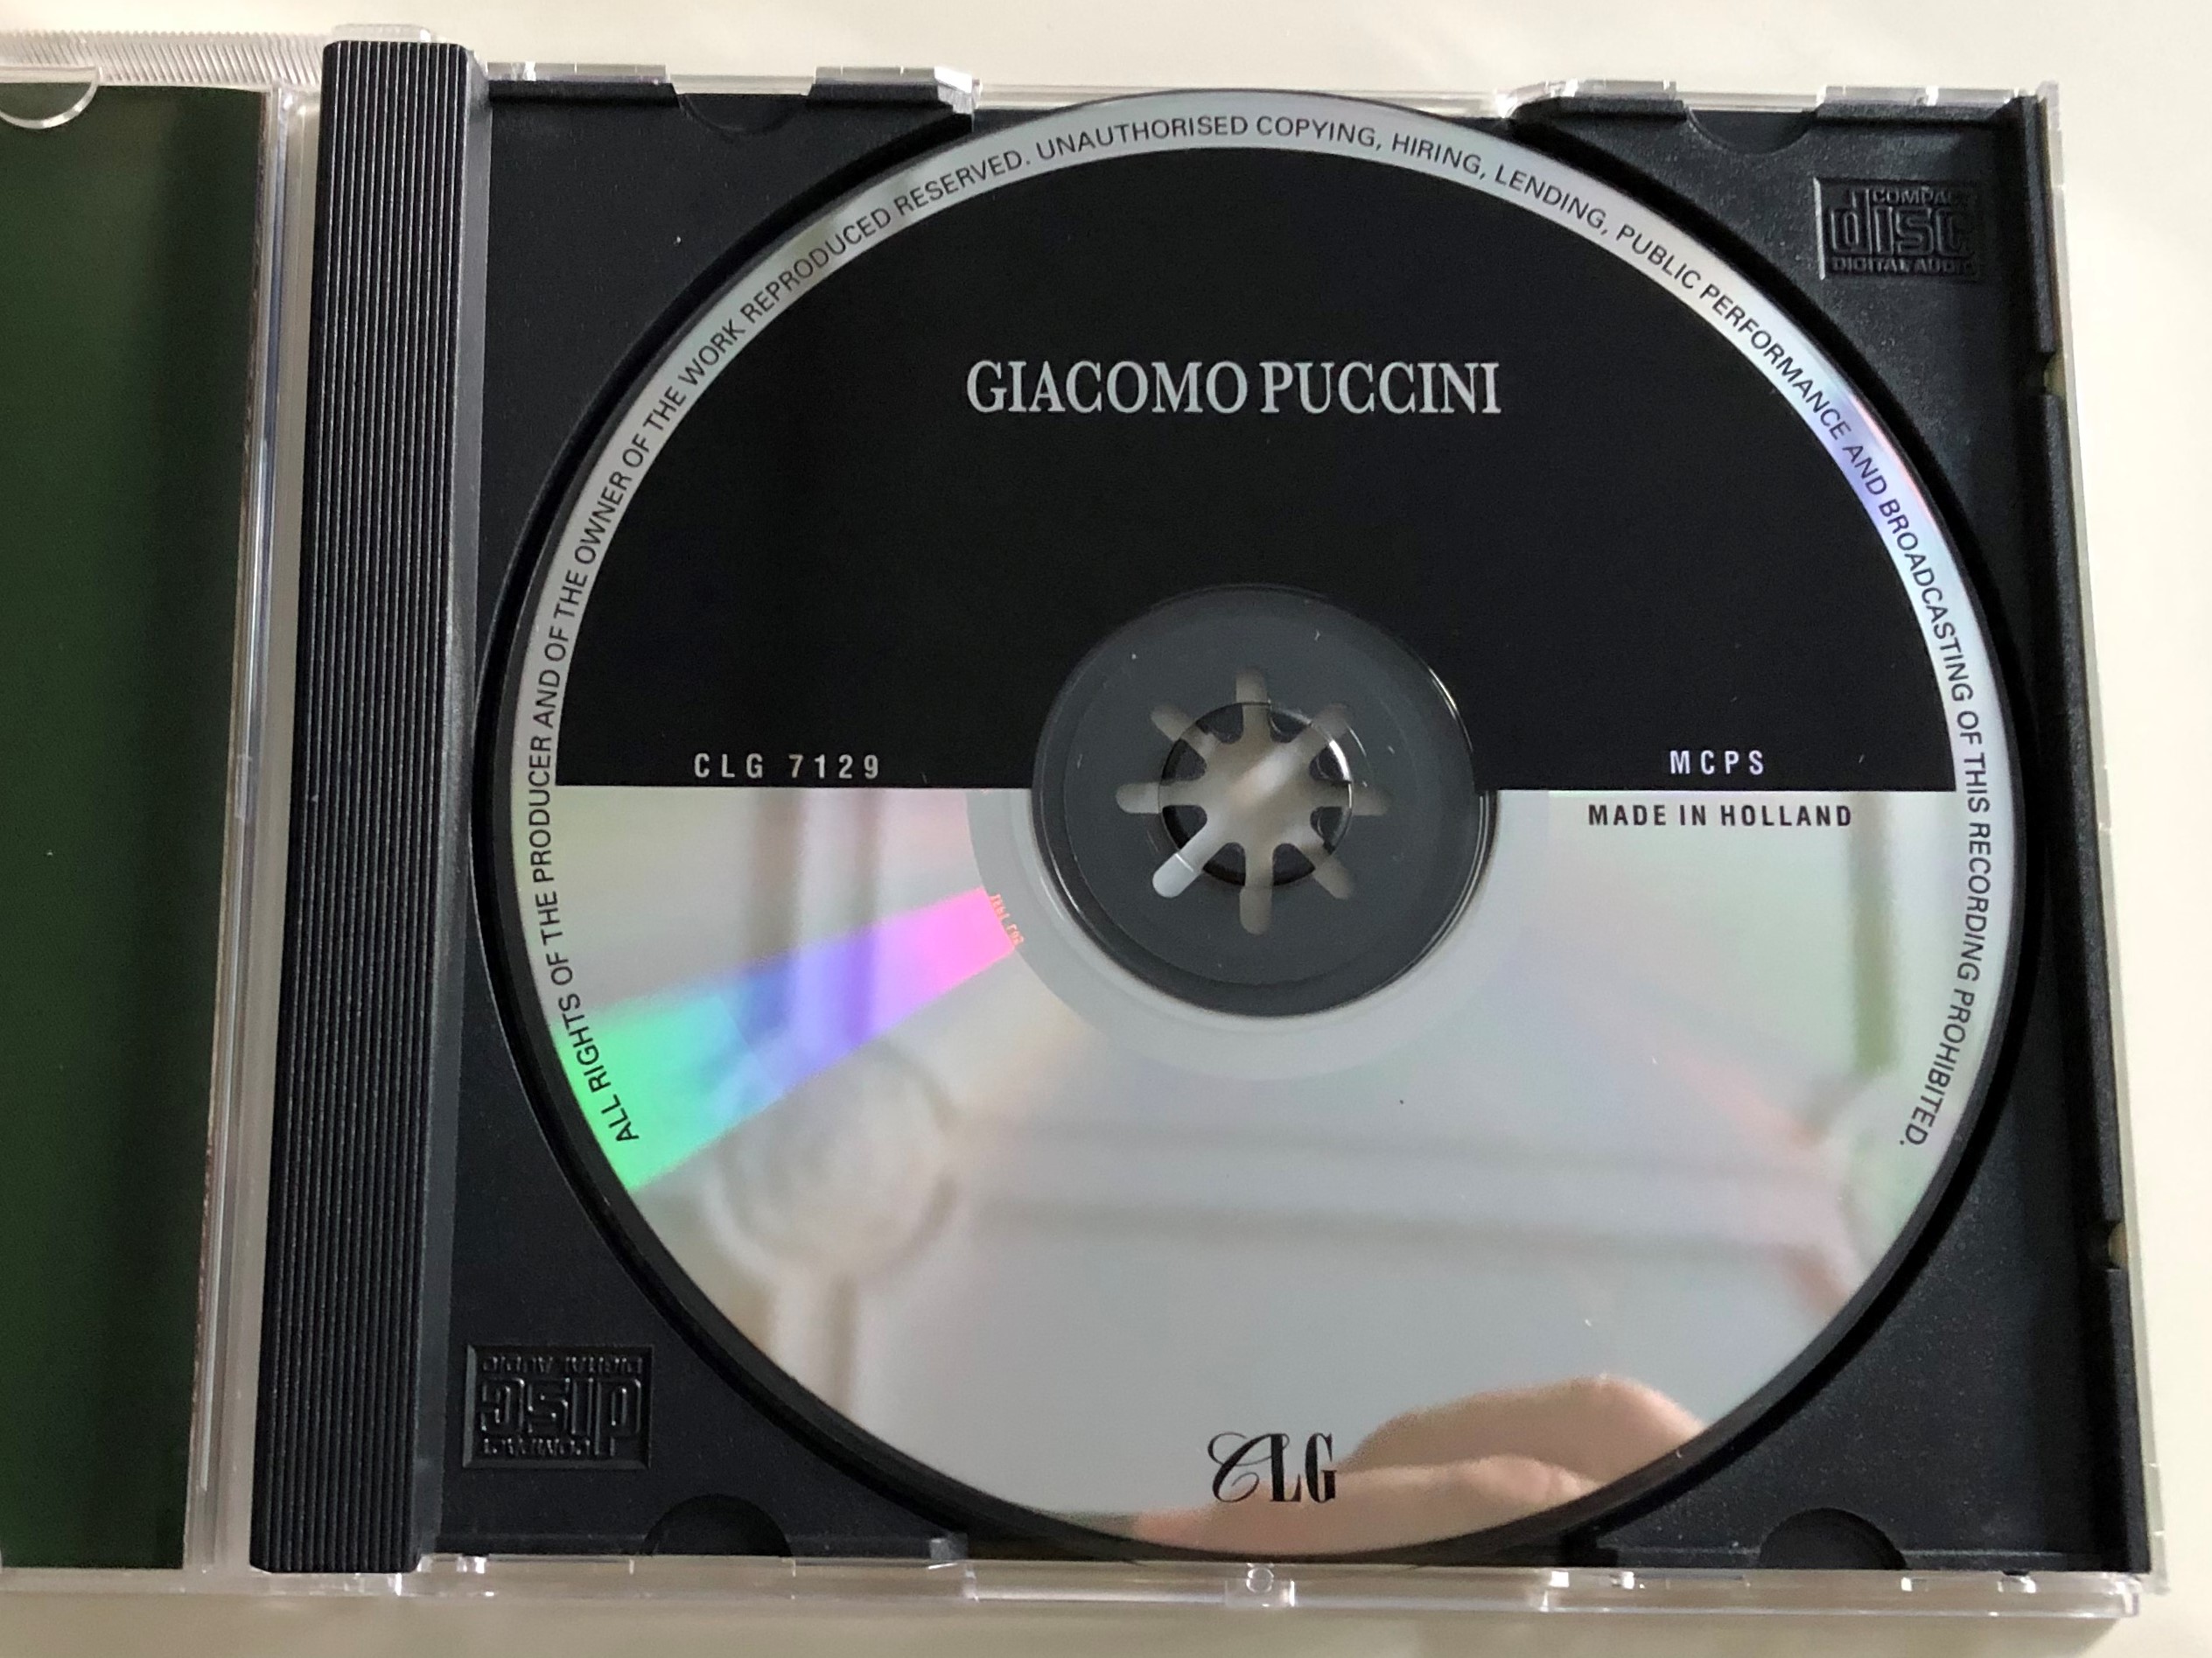 giacomo-puccini-highlights-from-madama-butterfly-classical-gallery-audio-cd-1995-clg-7129-3-.jpg